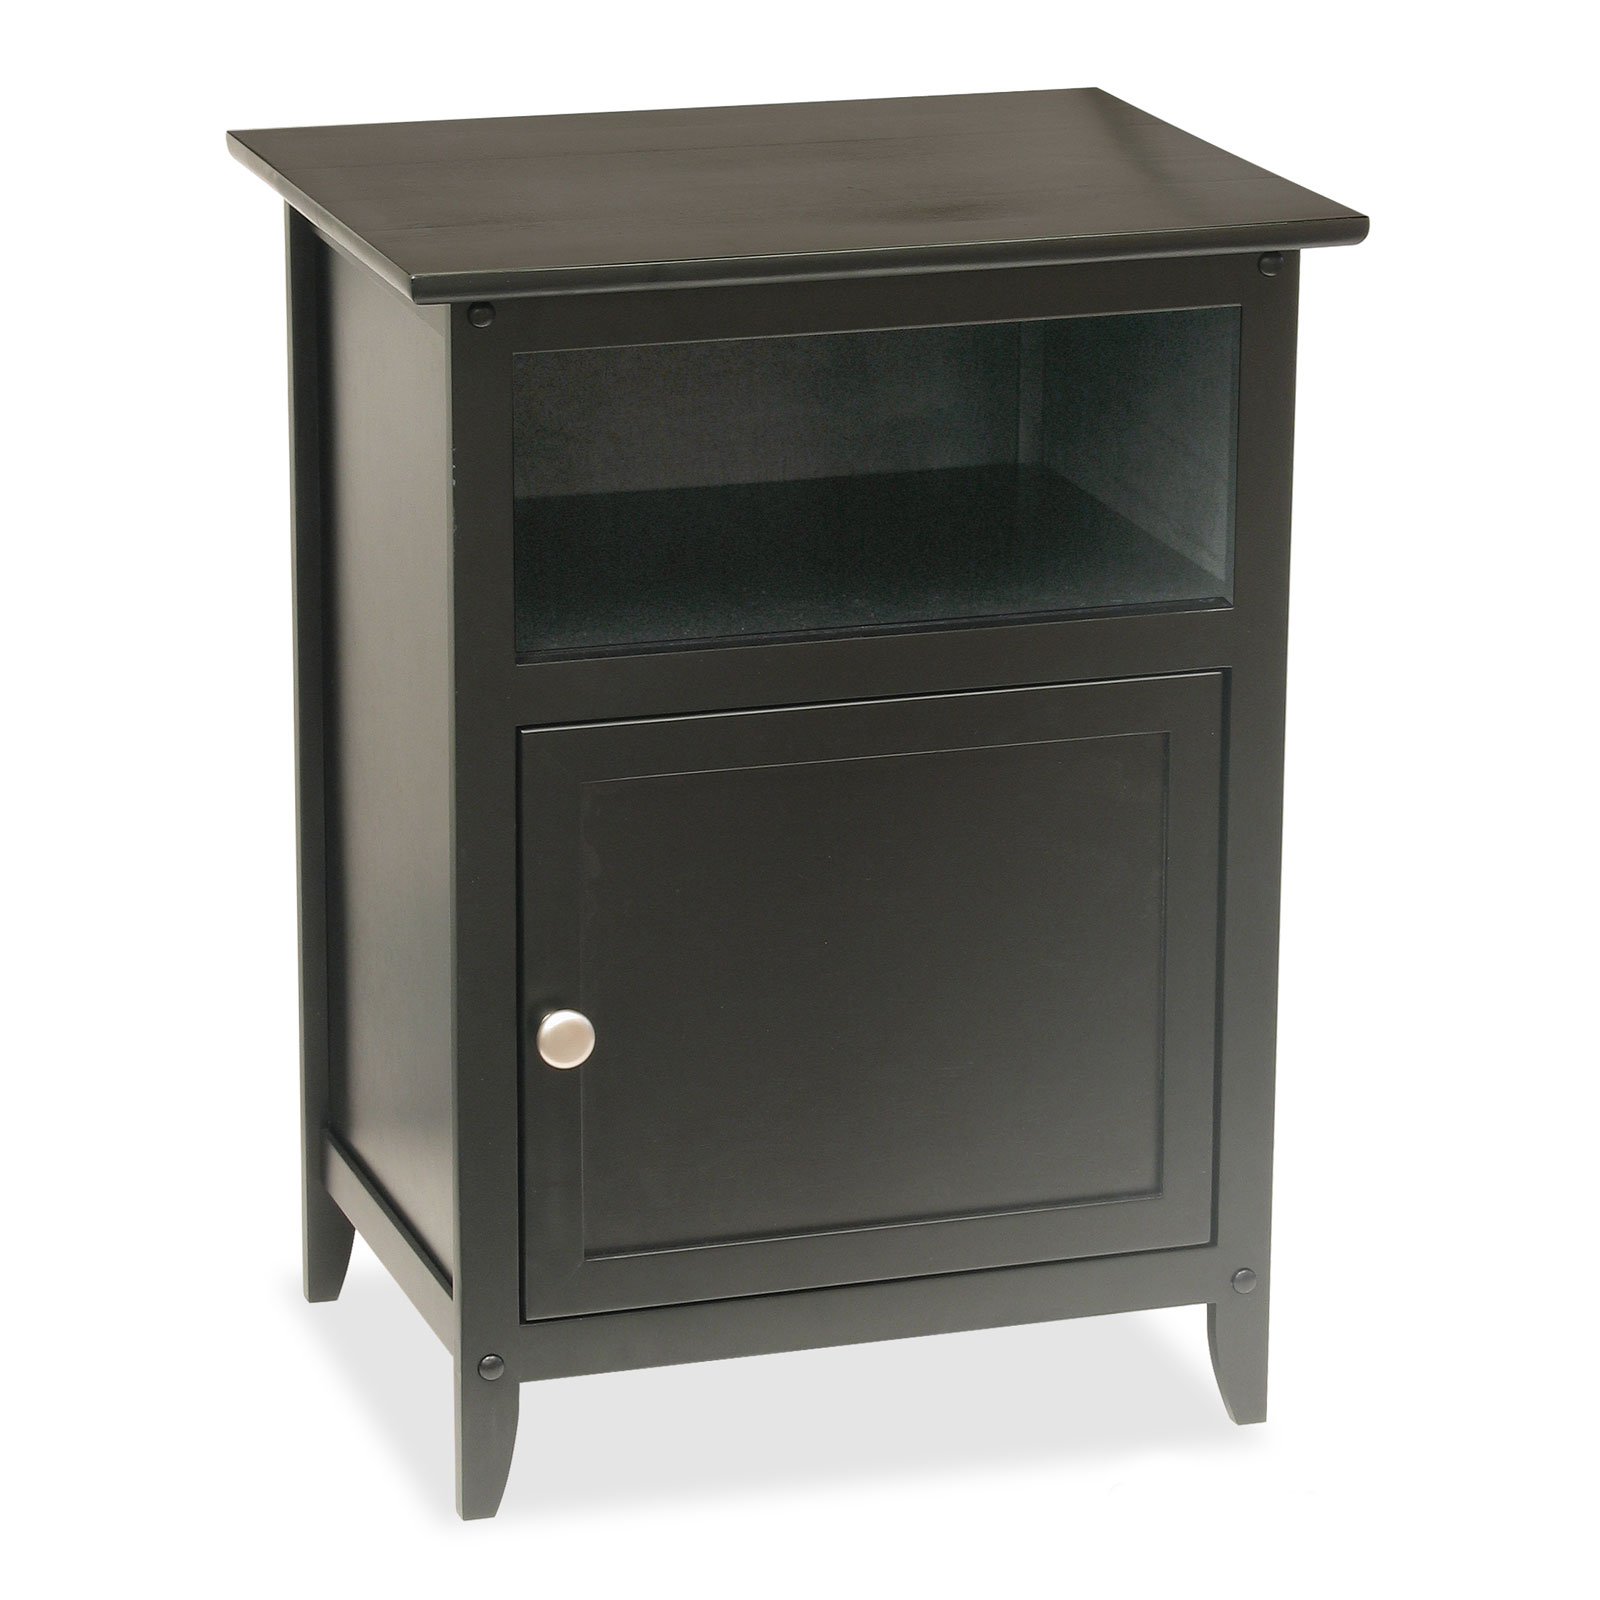 the fantastic unbelievable target locker nightstand ideas hotxpress black painted oak wood which furnished with top storage shelf nightstands appealing small design for colorful